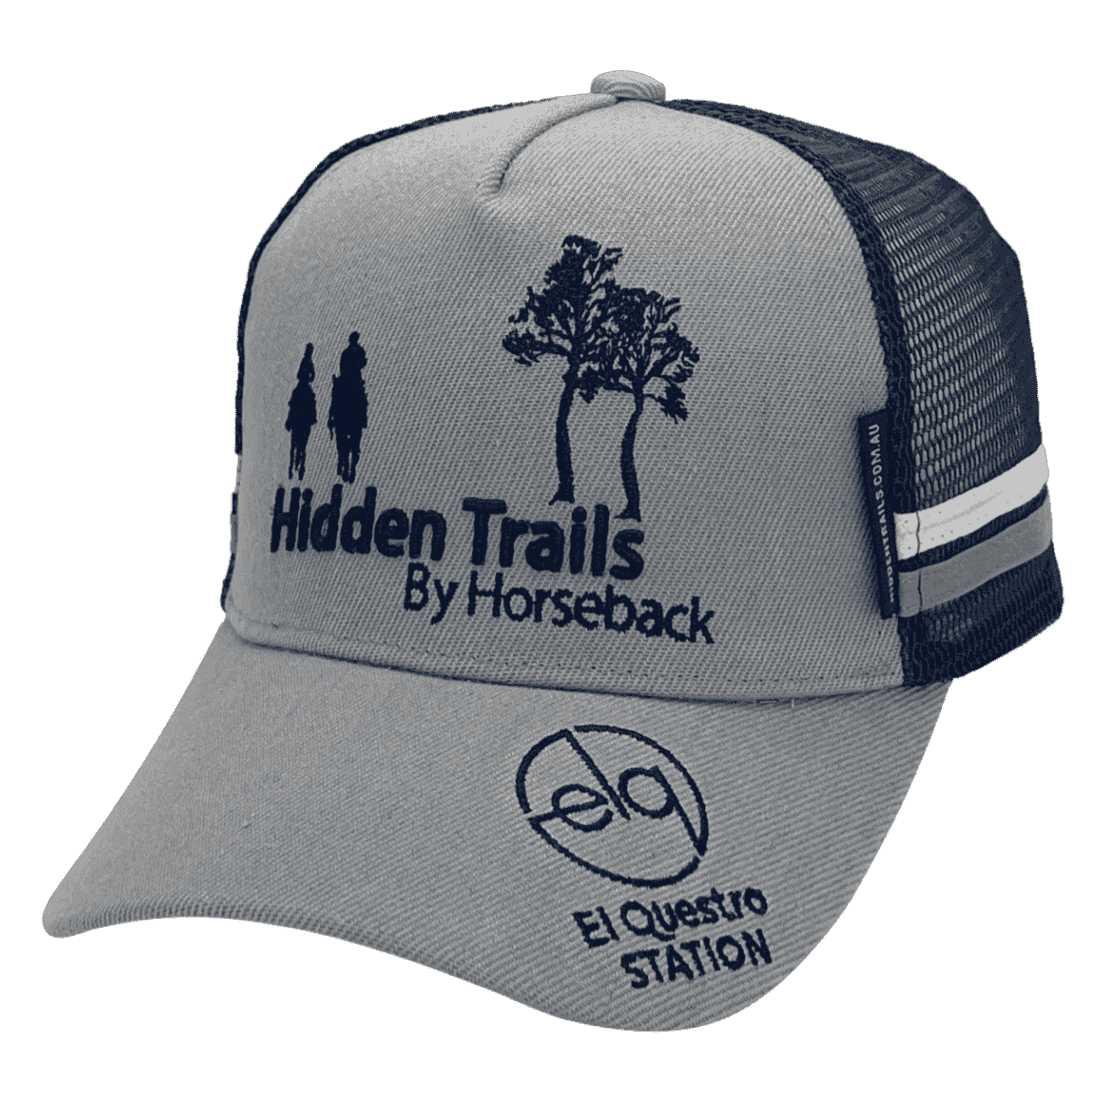 Hidden Trials By Horseback Tolmie Vic LP Midrange Aussie Trucker Hat with Australian Head Fit Crown and Double Side Bands